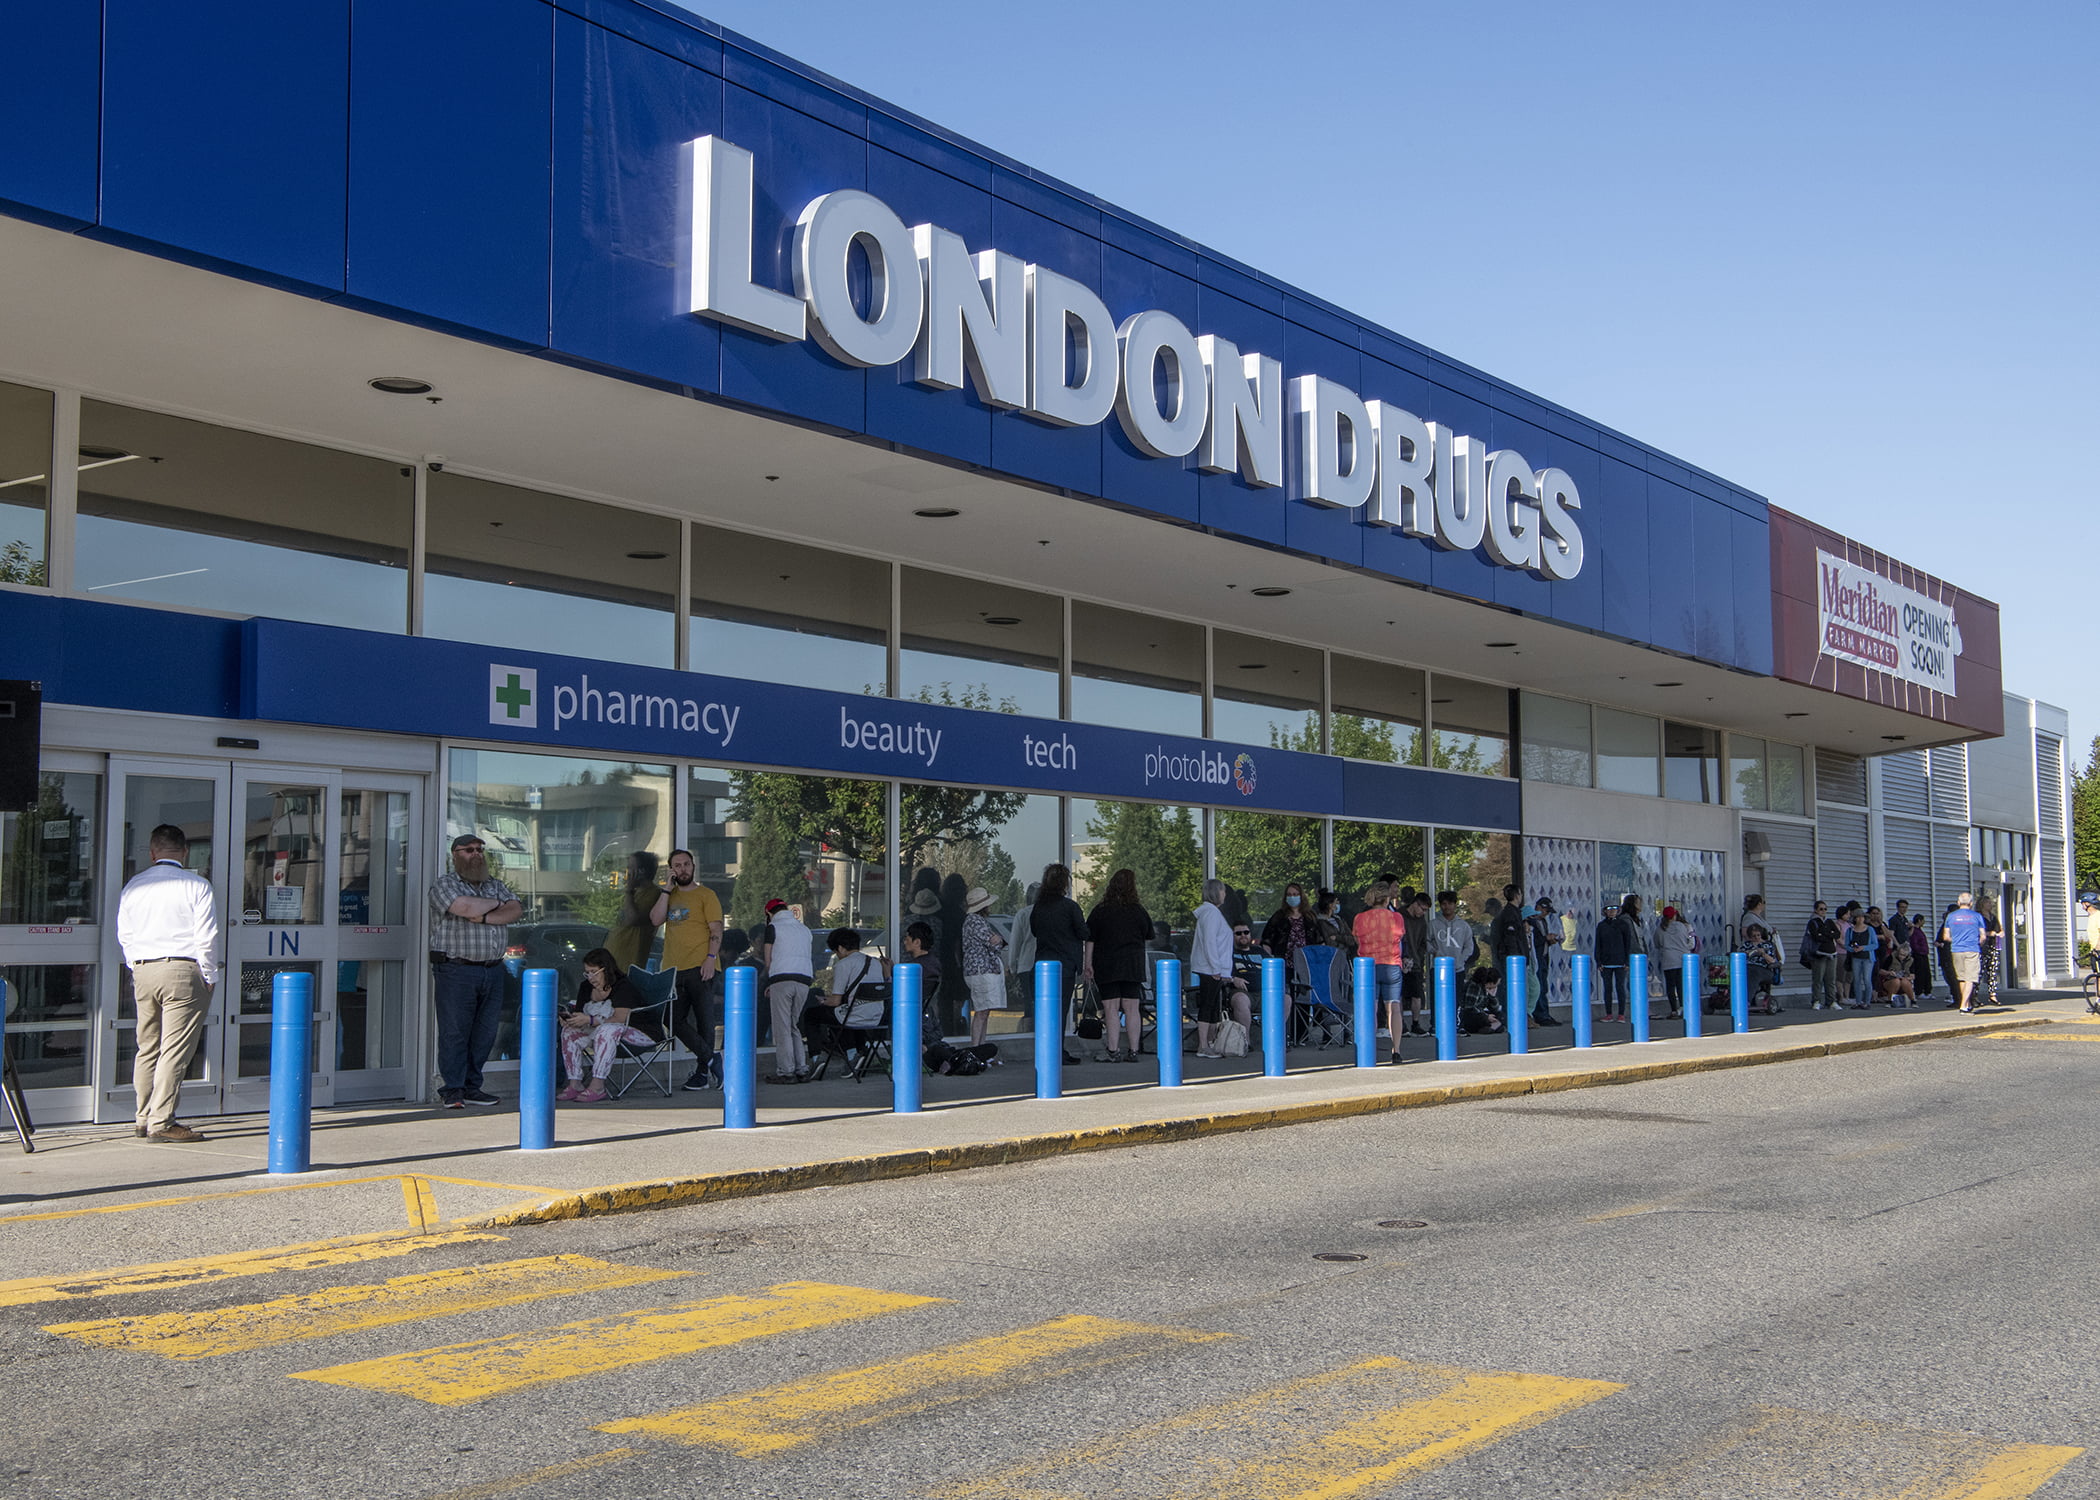 London Drugs not considering store closures due to escalating